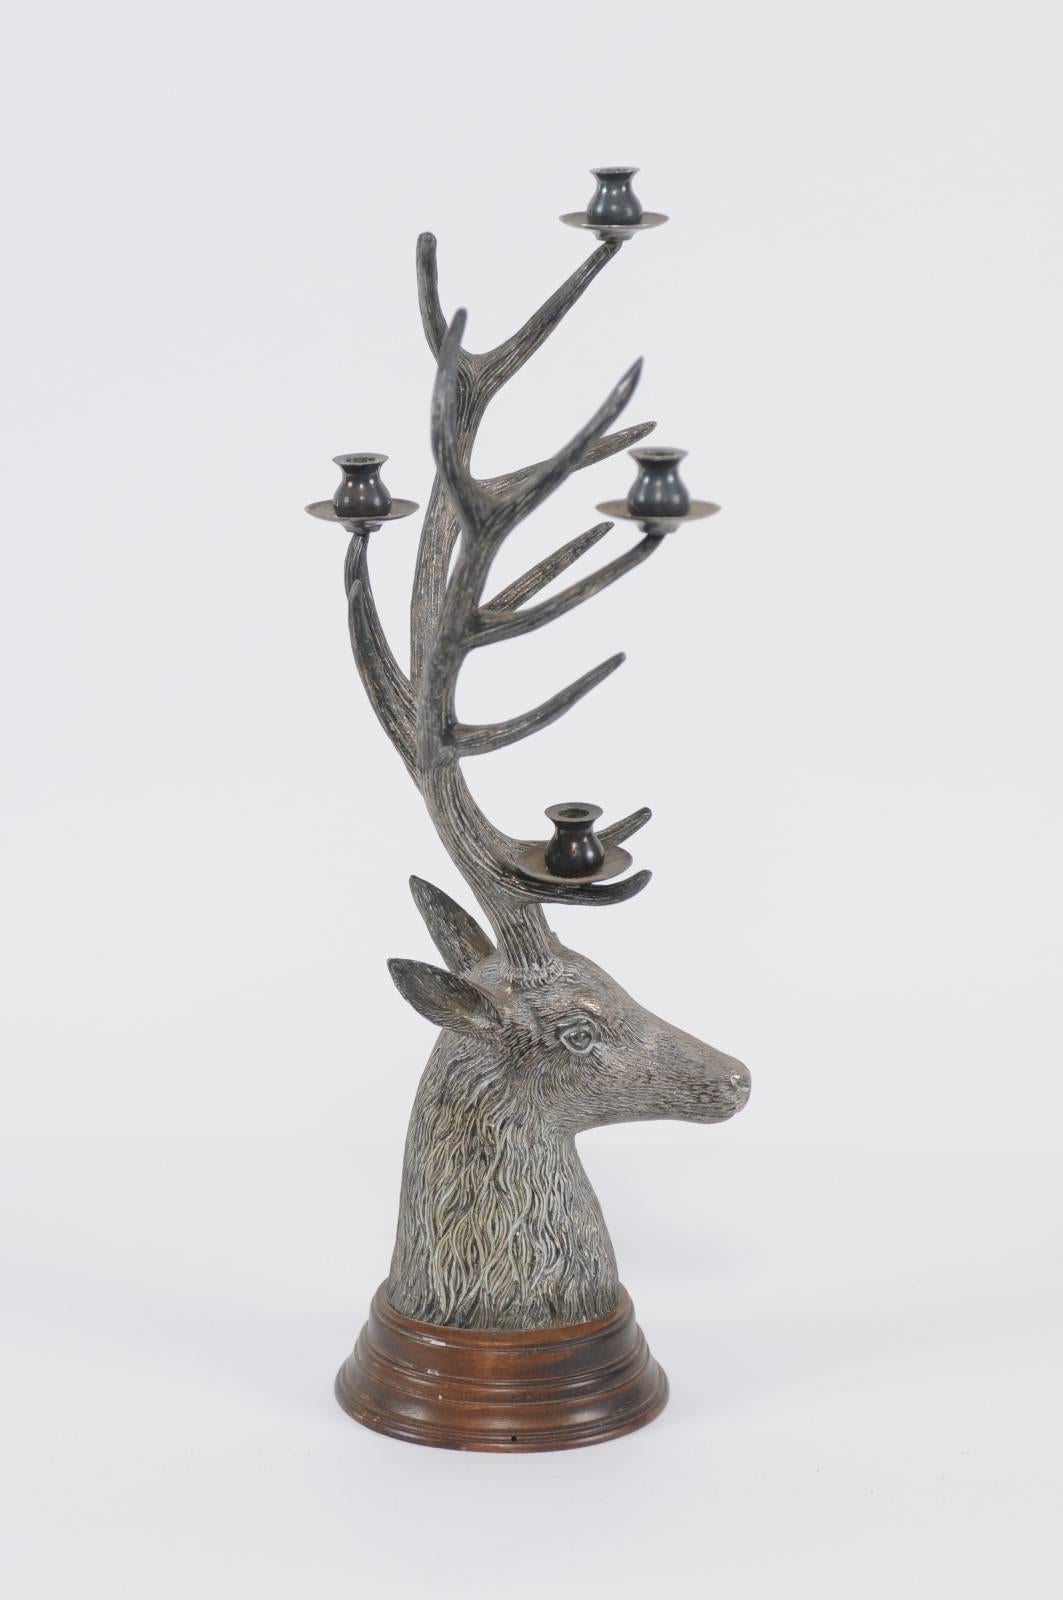 Cast French Vintage Bronze Candelabra Depicting a Buck Head with Tall Antlers, 1950s